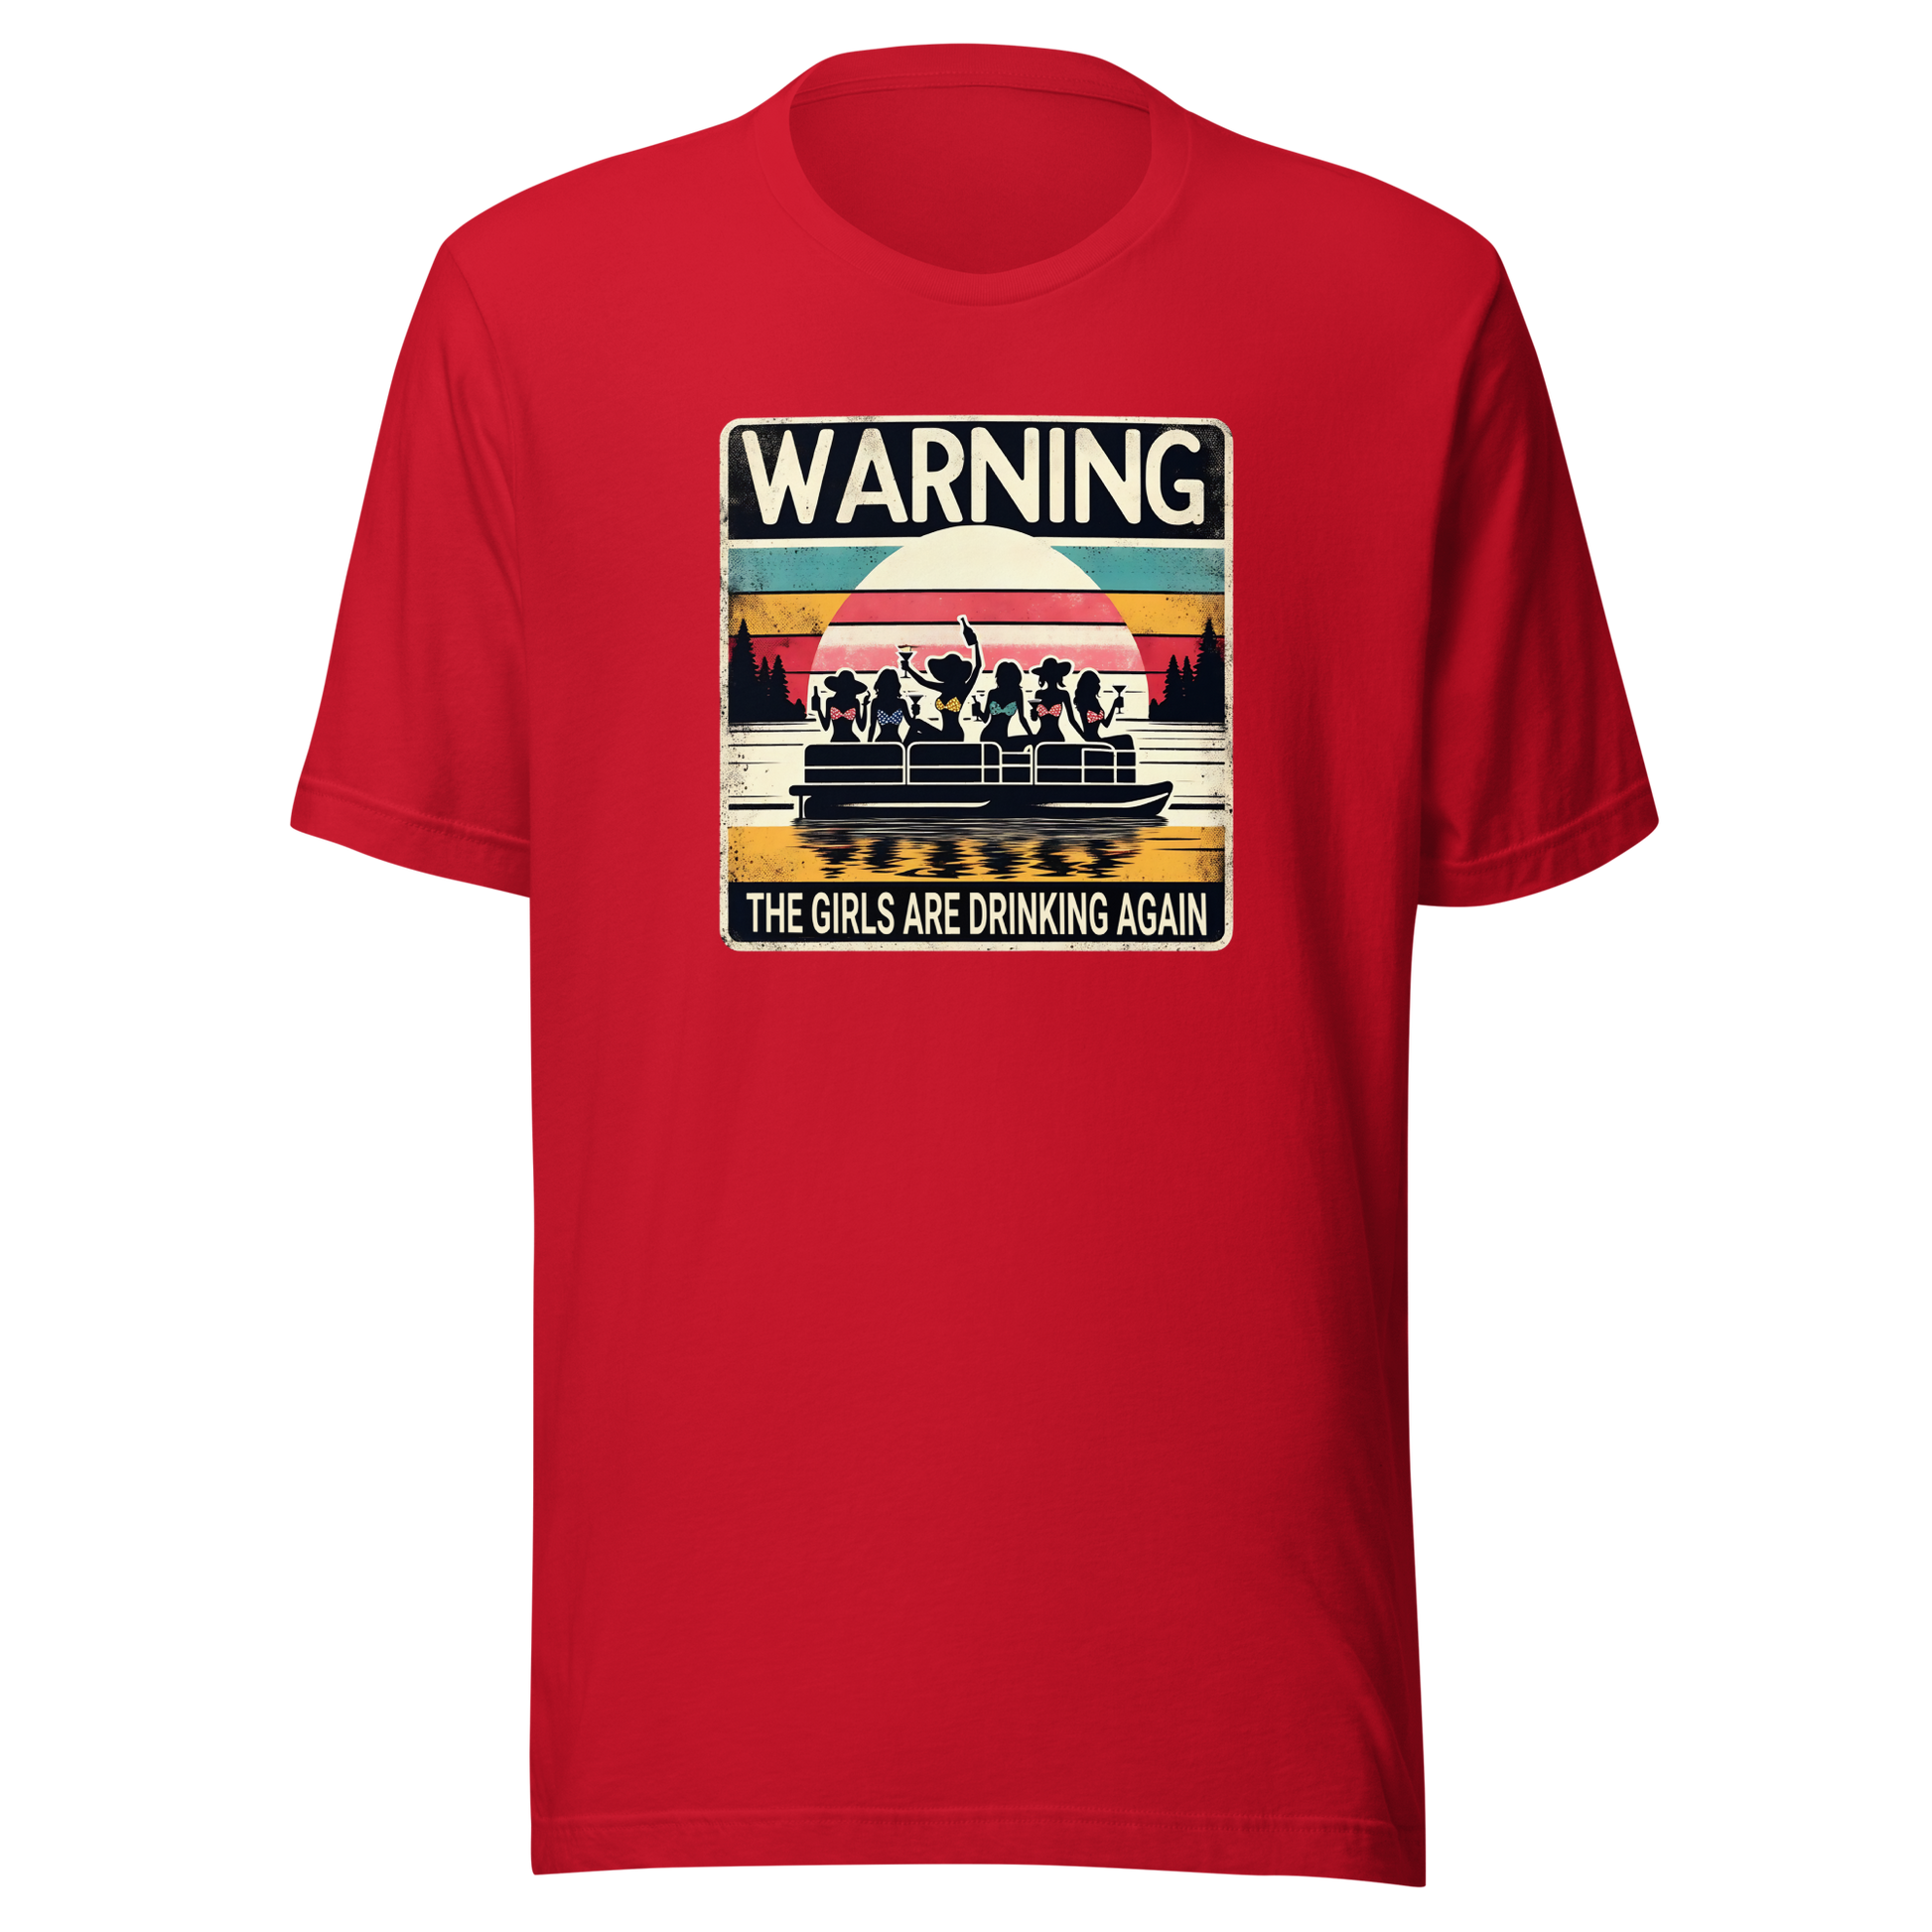 Tee showing "Warning: The Girls Are Drinking Again" with an image of girls on a pontoon boat enjoying drinks at sunset.